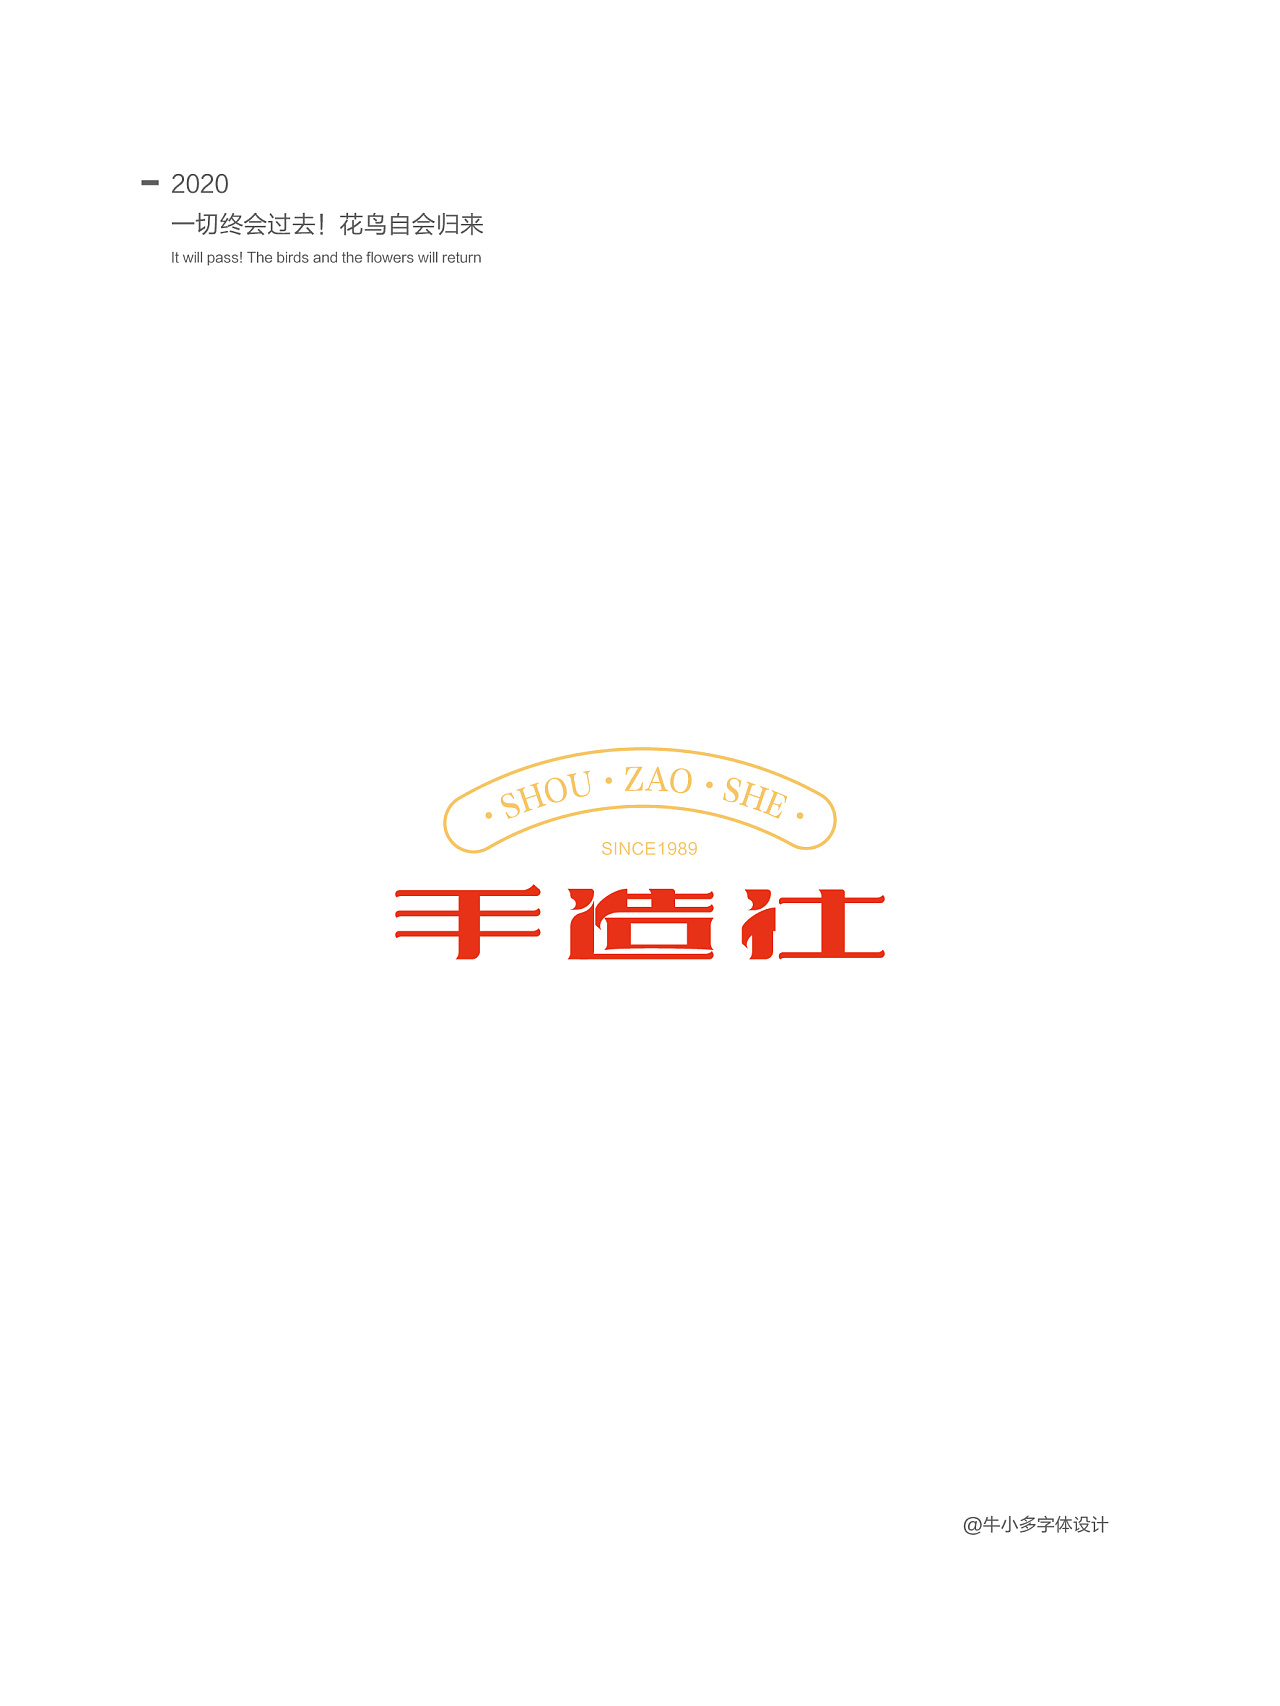 Chinese Creative Font Design-Everything will pass and flowers and birds will return!